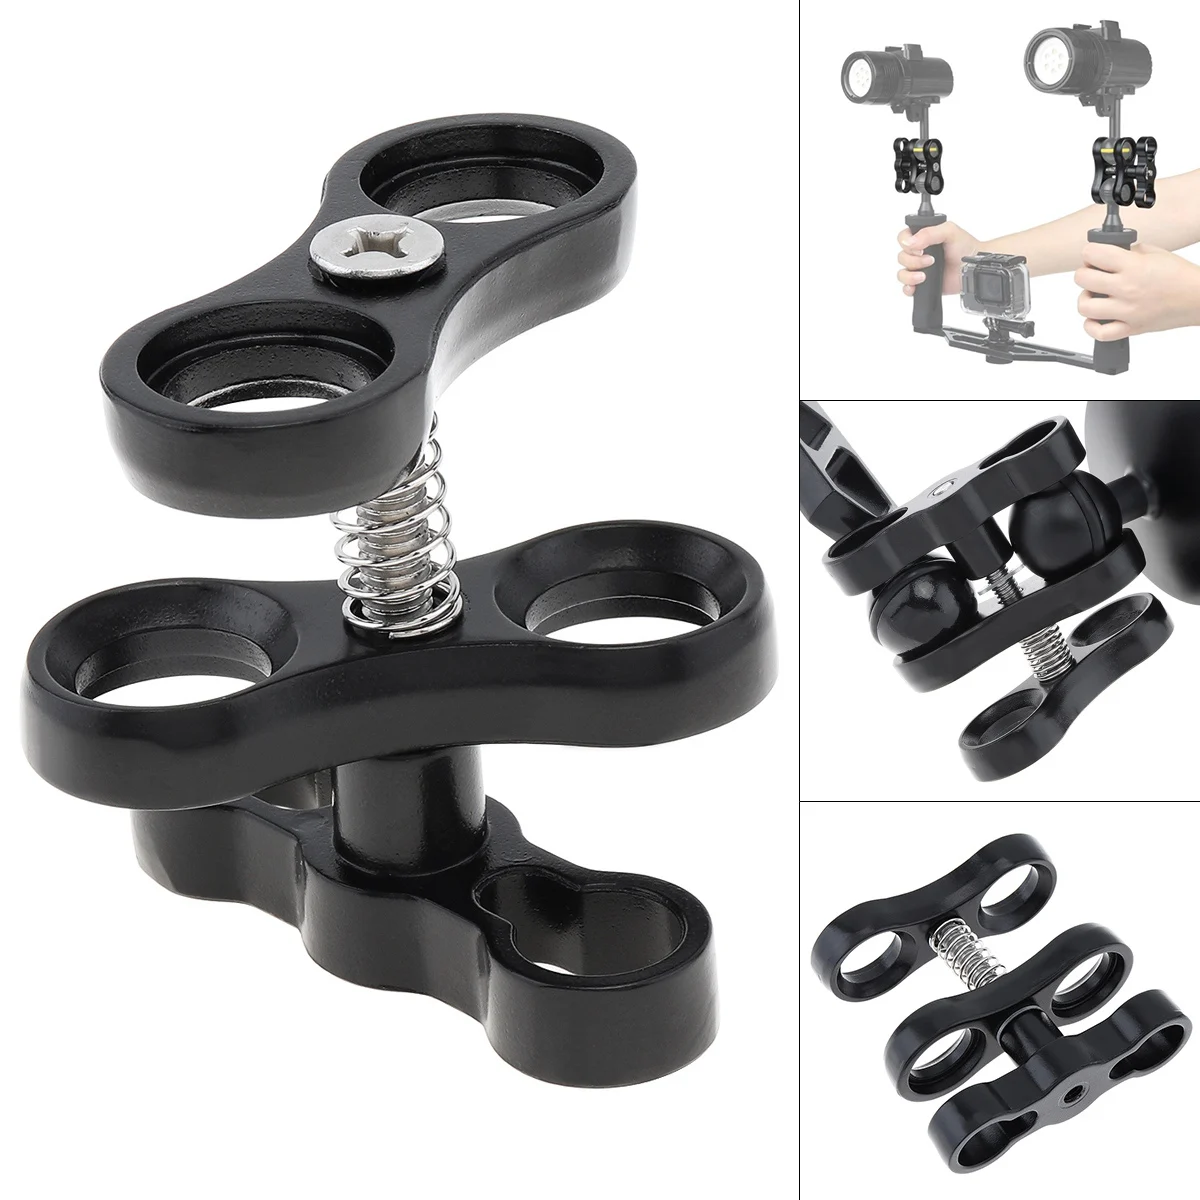 Universal Diving Video Fill Lights Ball Butterfly Clip Clamp Mount 360 Rotate Fit for GoPro Hero 7 6 5 Action Camera Accessories